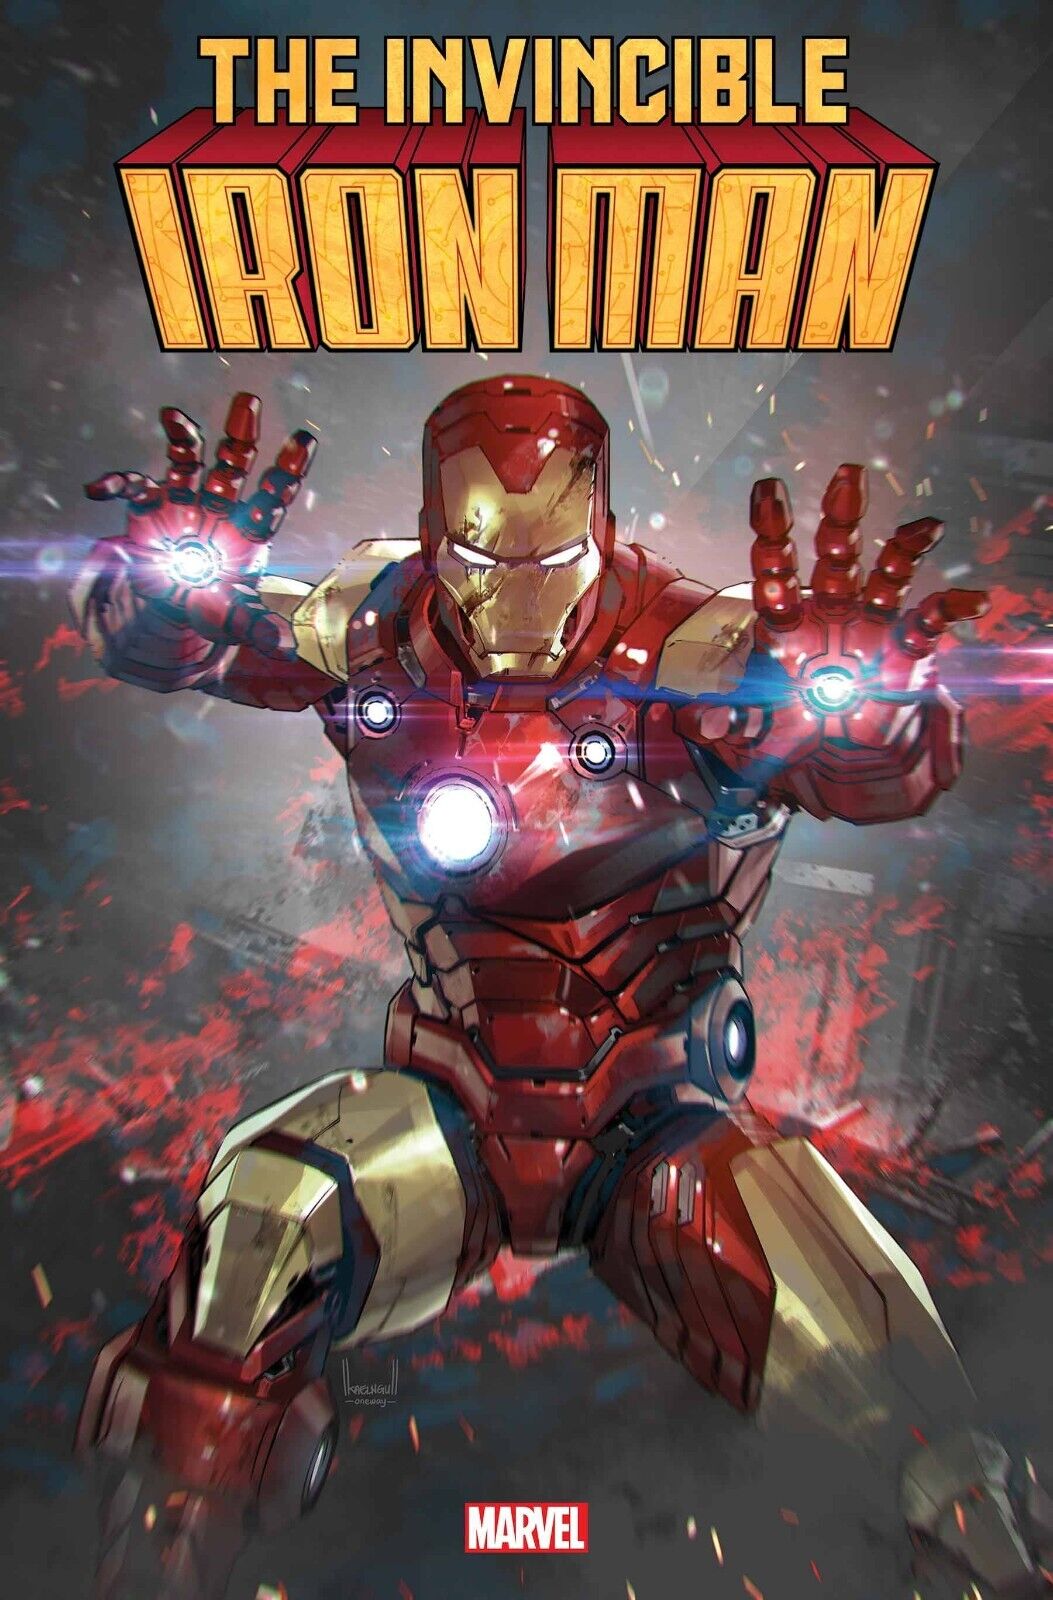 Invincible Iron Man #1 Released 12/14/2022 (Variants Available) MARVEL Comics